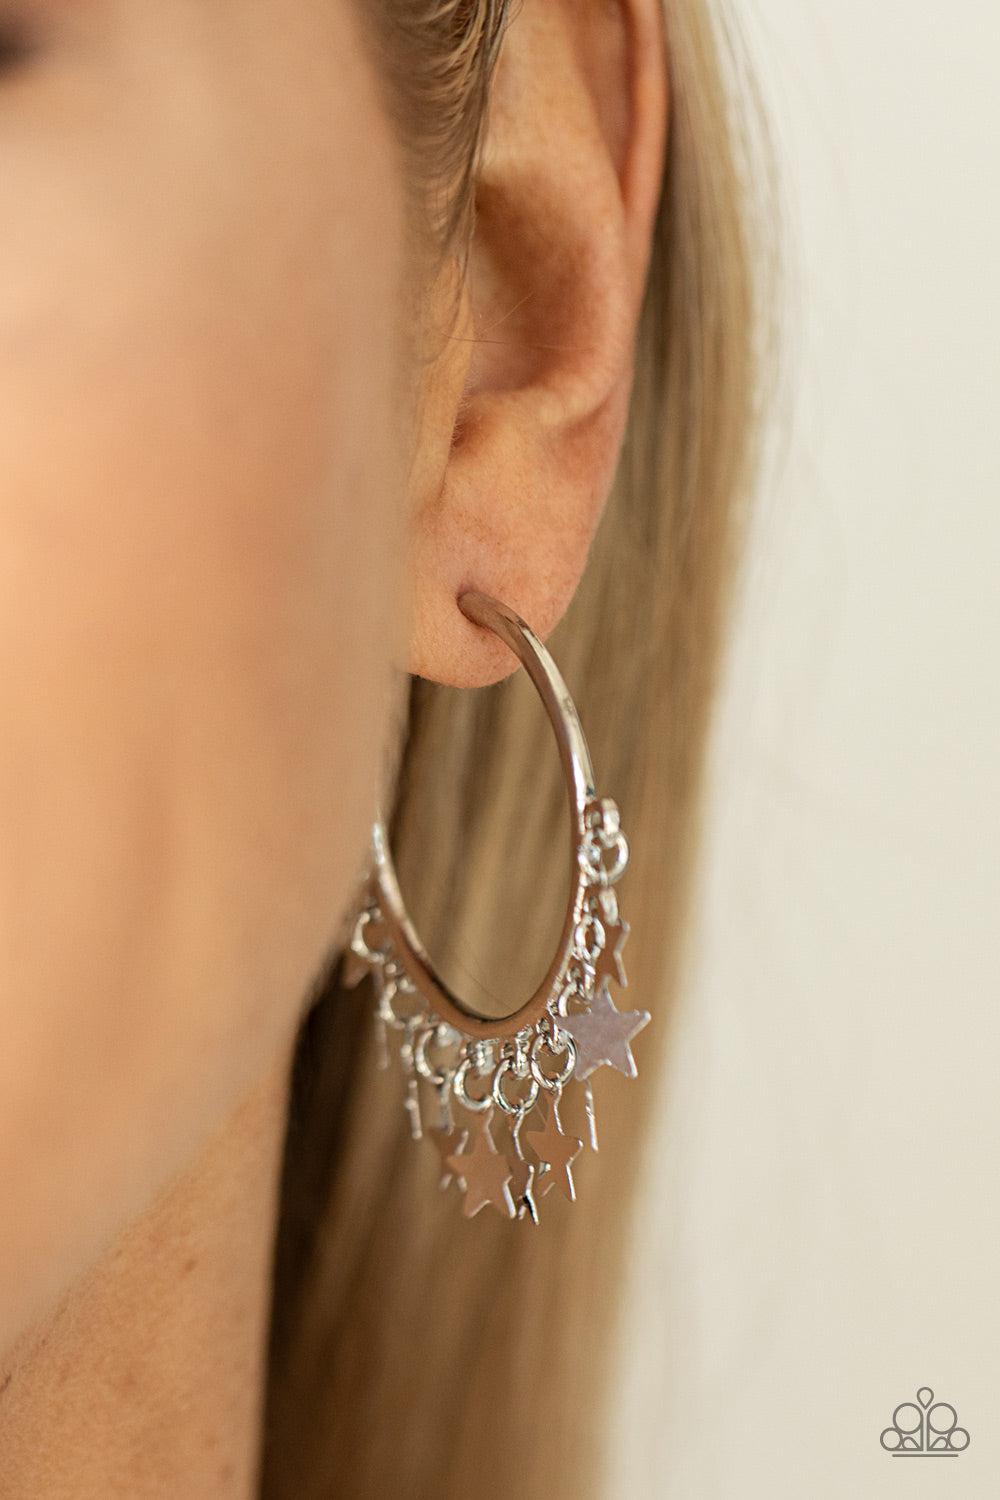 Happy Independence Day Silver Star Hoop Earrings - Paparazzi Accessories-on model - CarasShop.com - $5 Jewelry by Cara Jewels